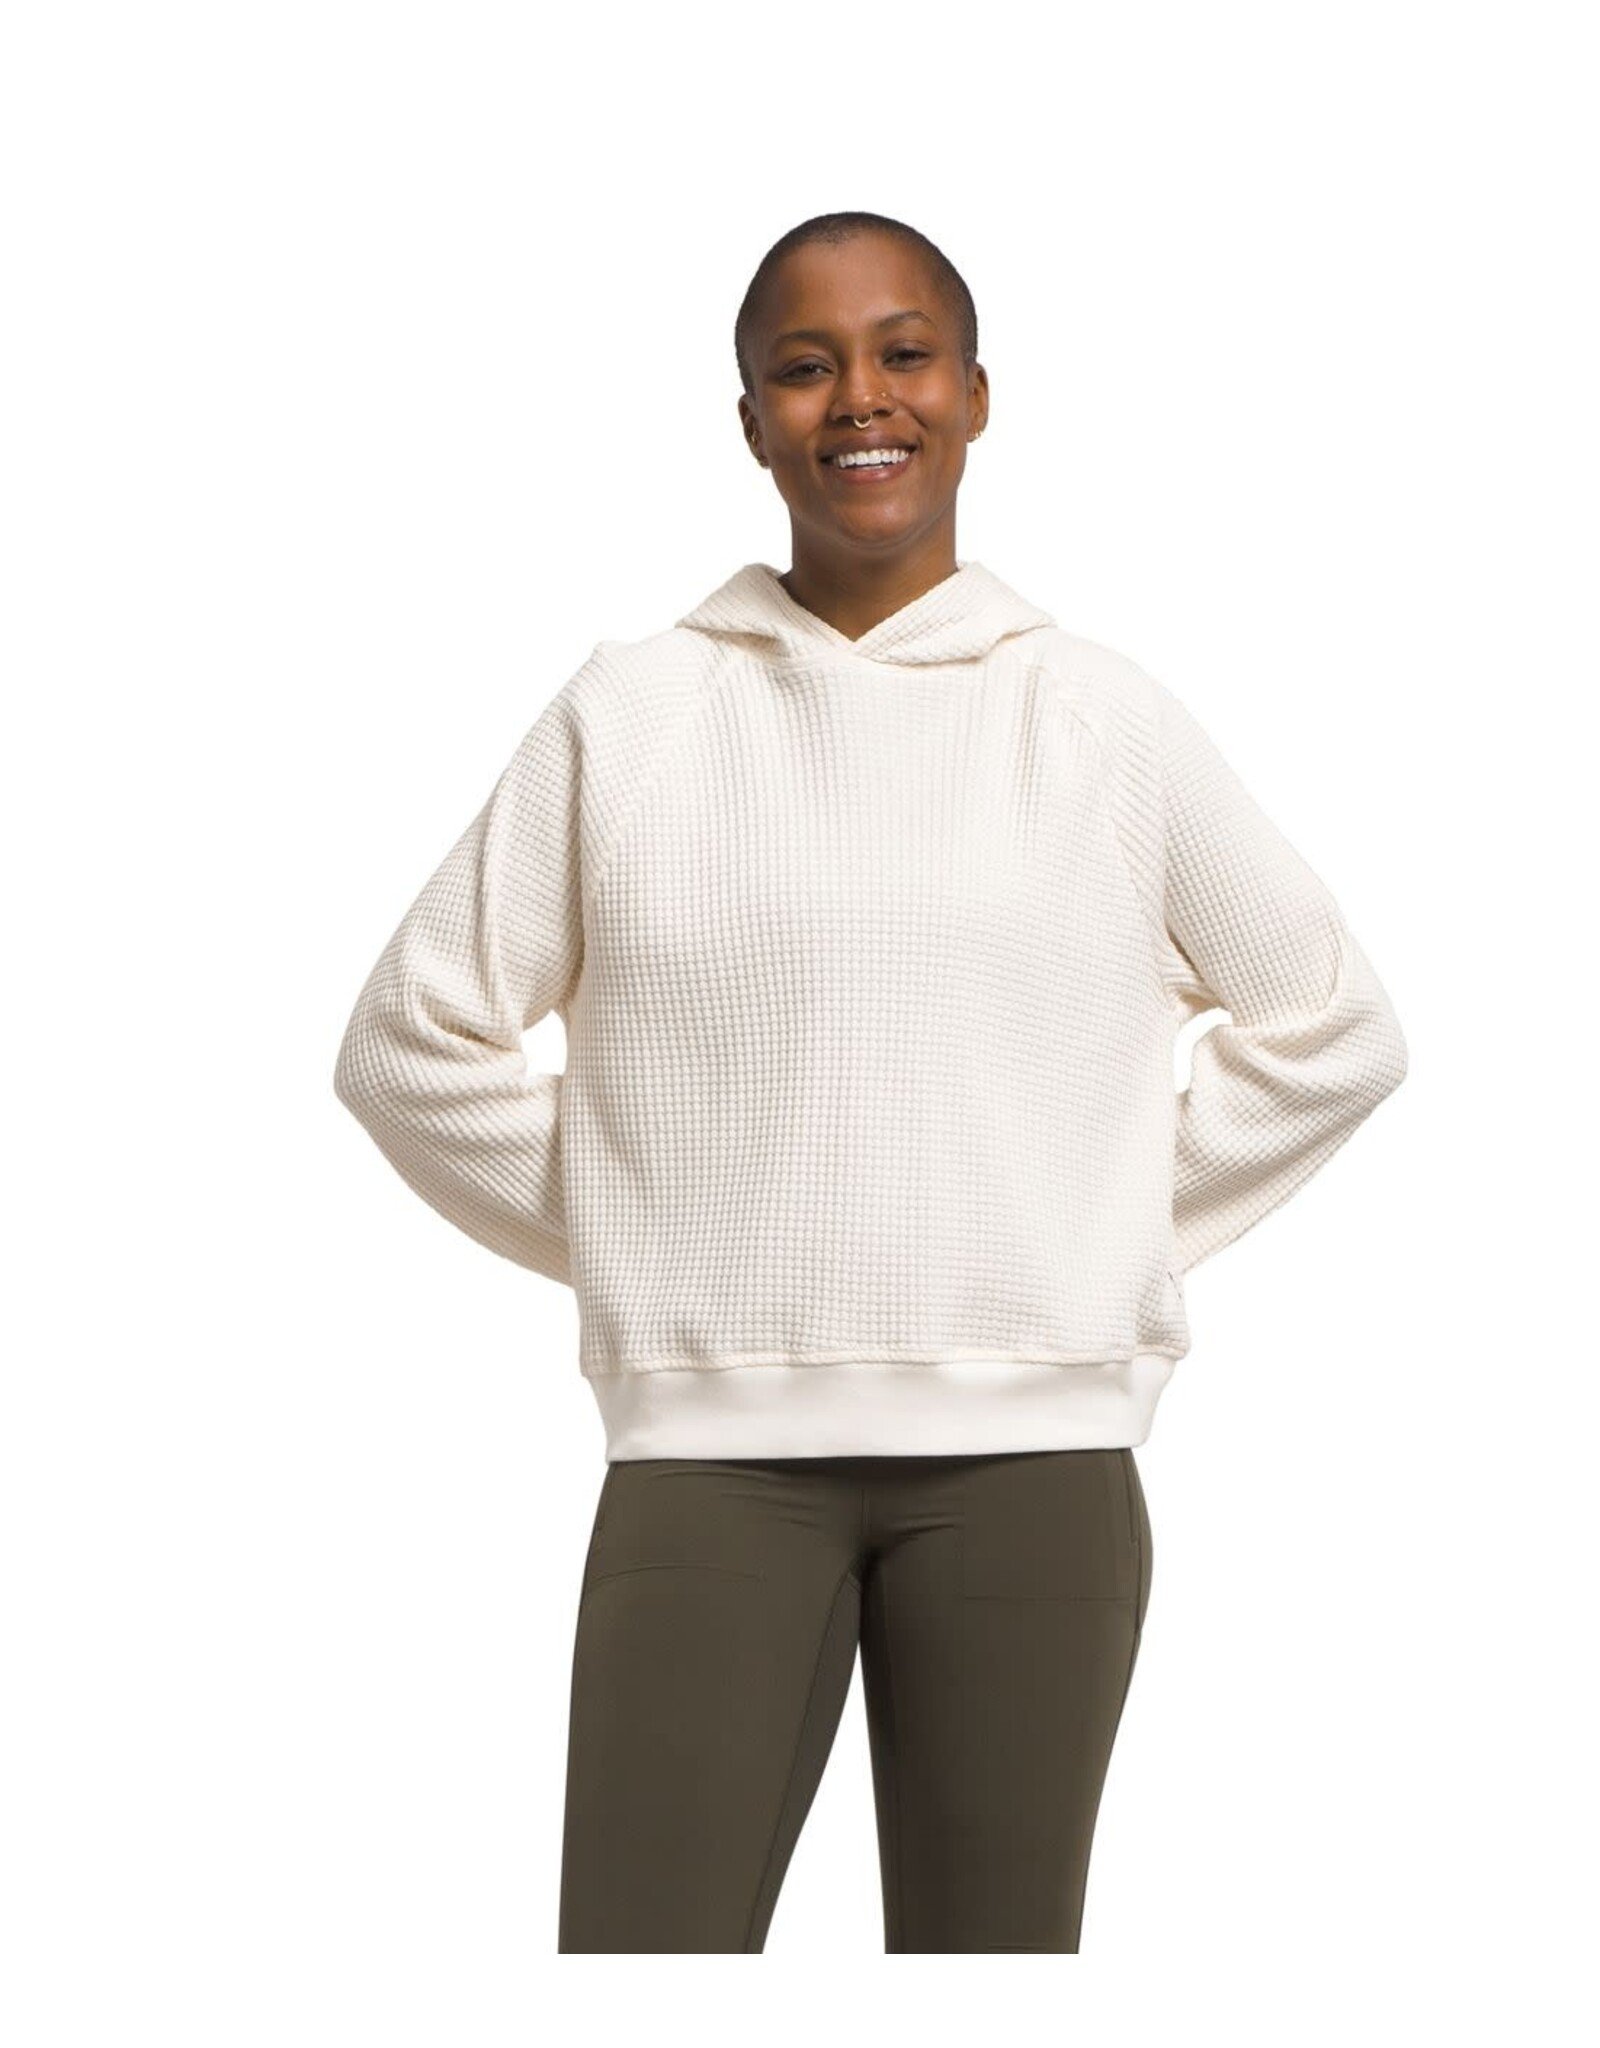 THE NORTH FACE WOMEN'S CHABOT HOODIE